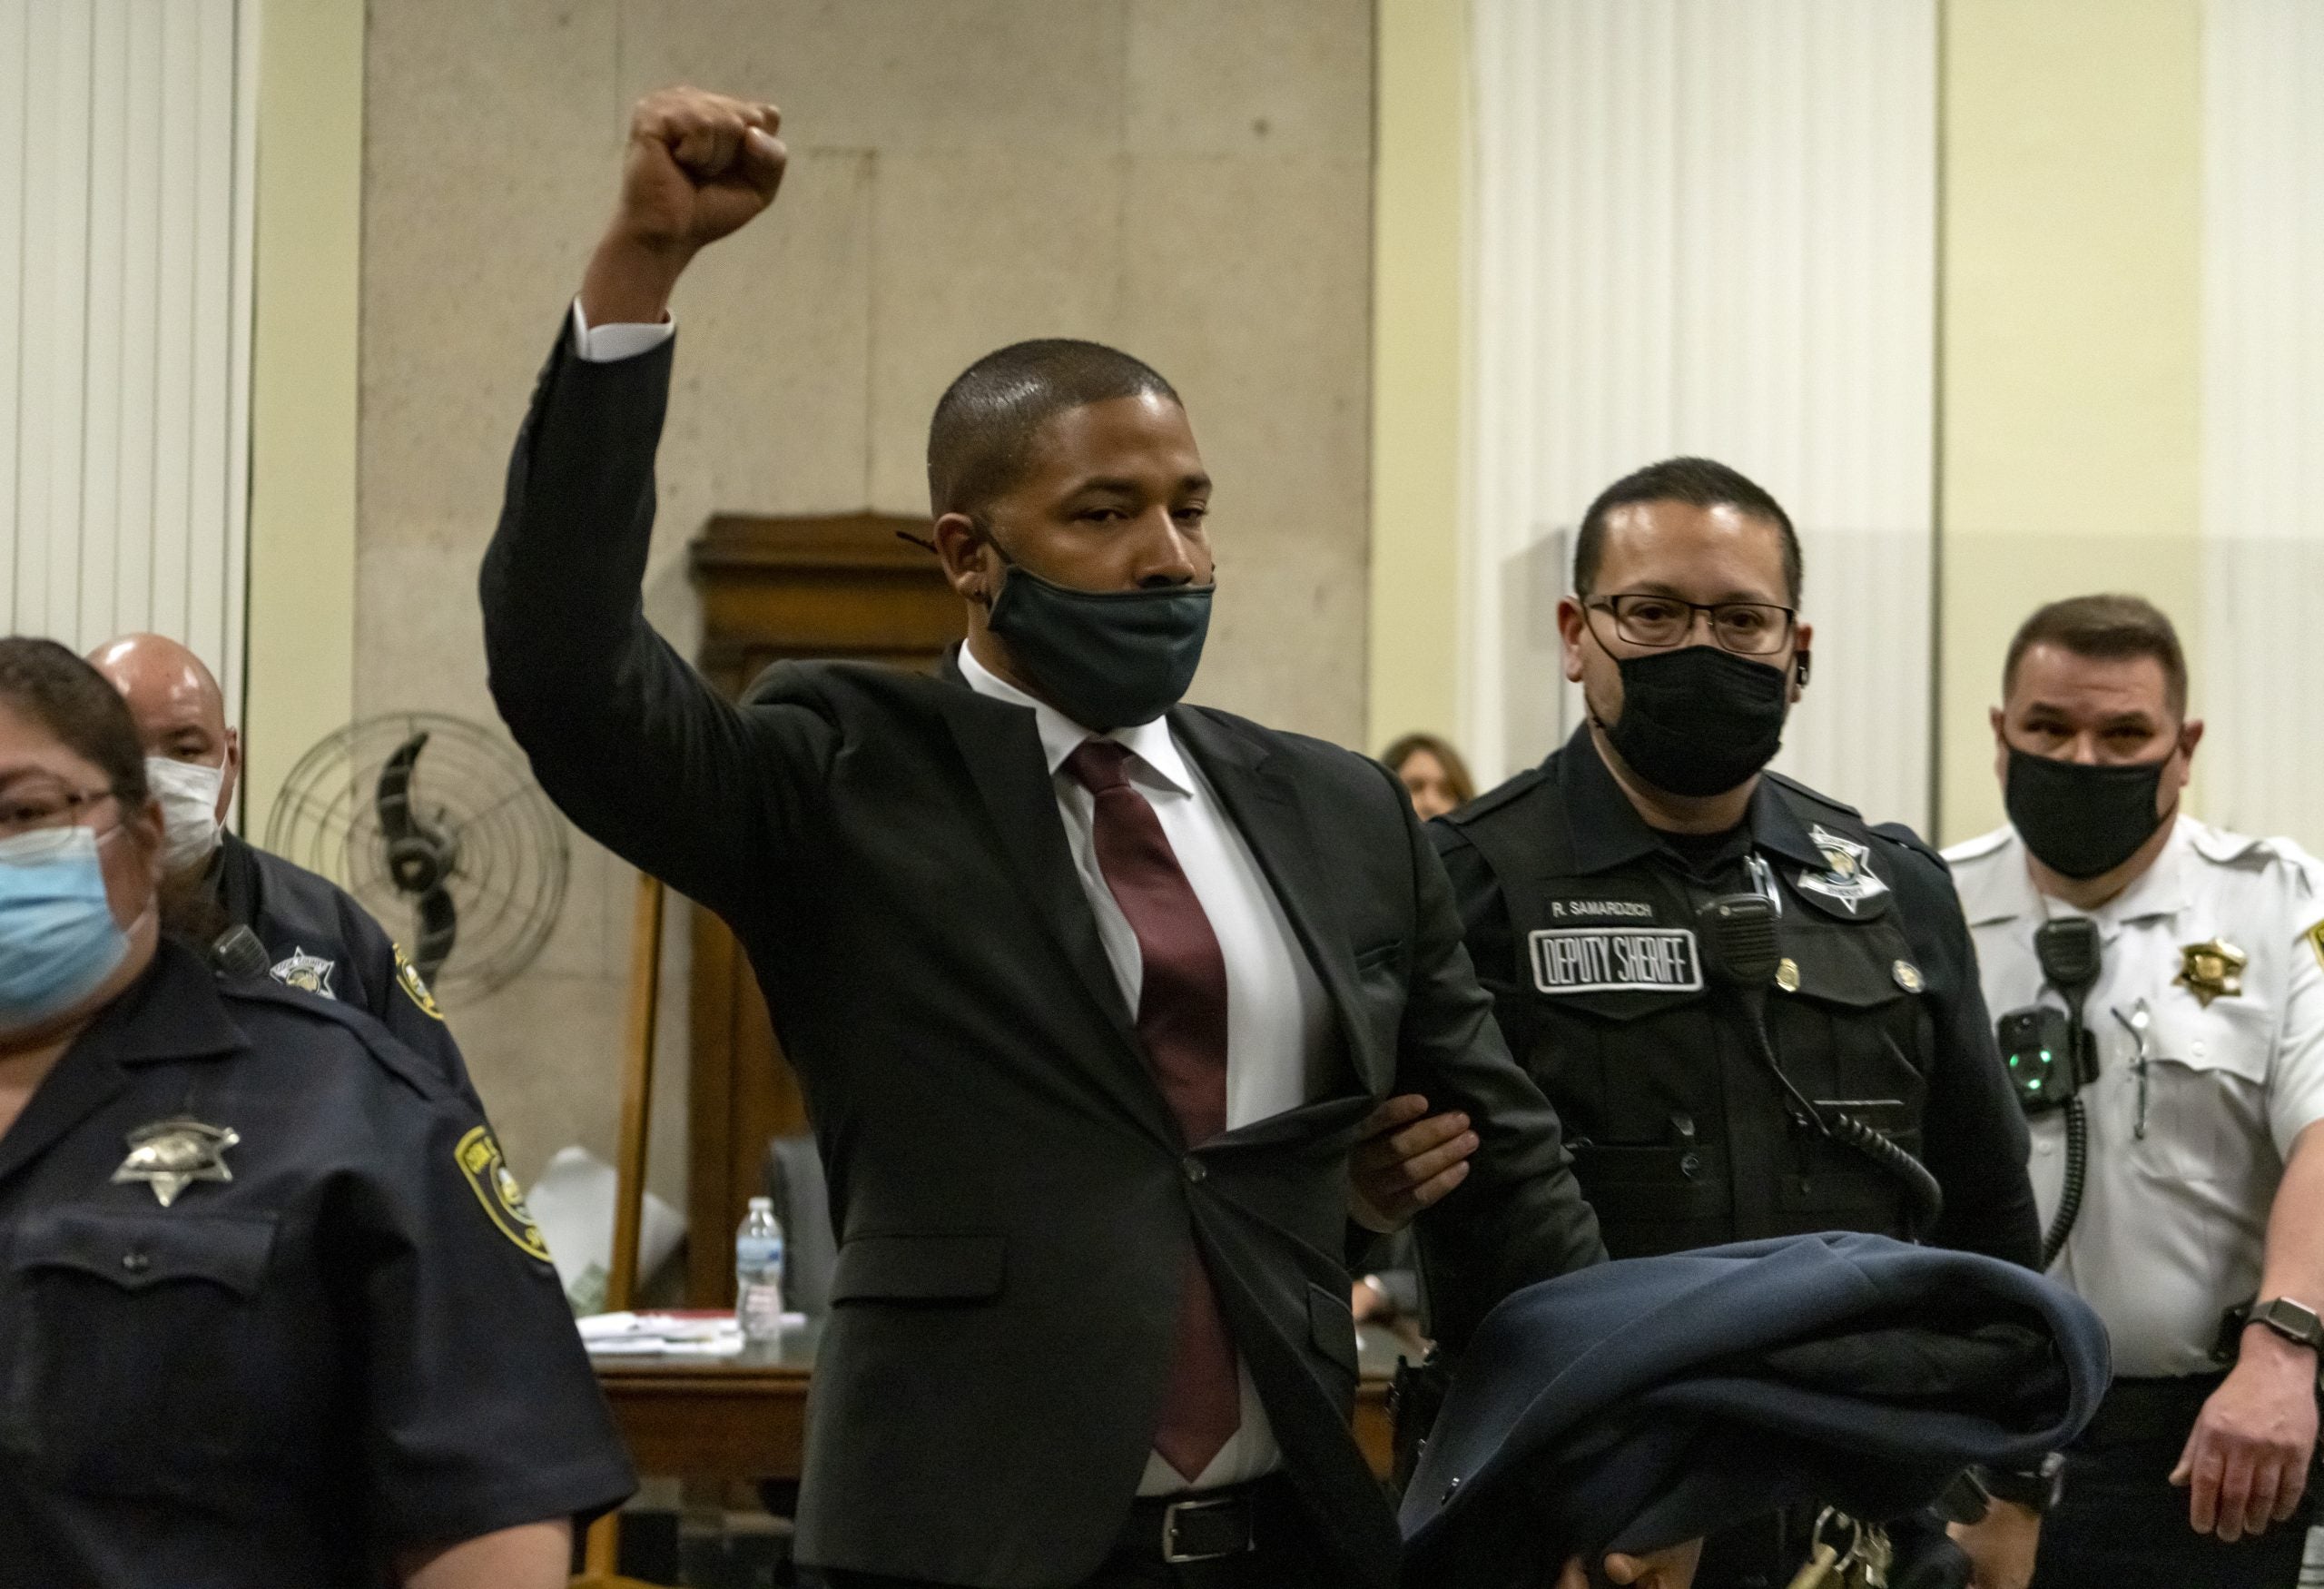 Jussie Smollet Sentenced To Five Months In Jail, 30 Months Felony Probation For Staging Hate Crime